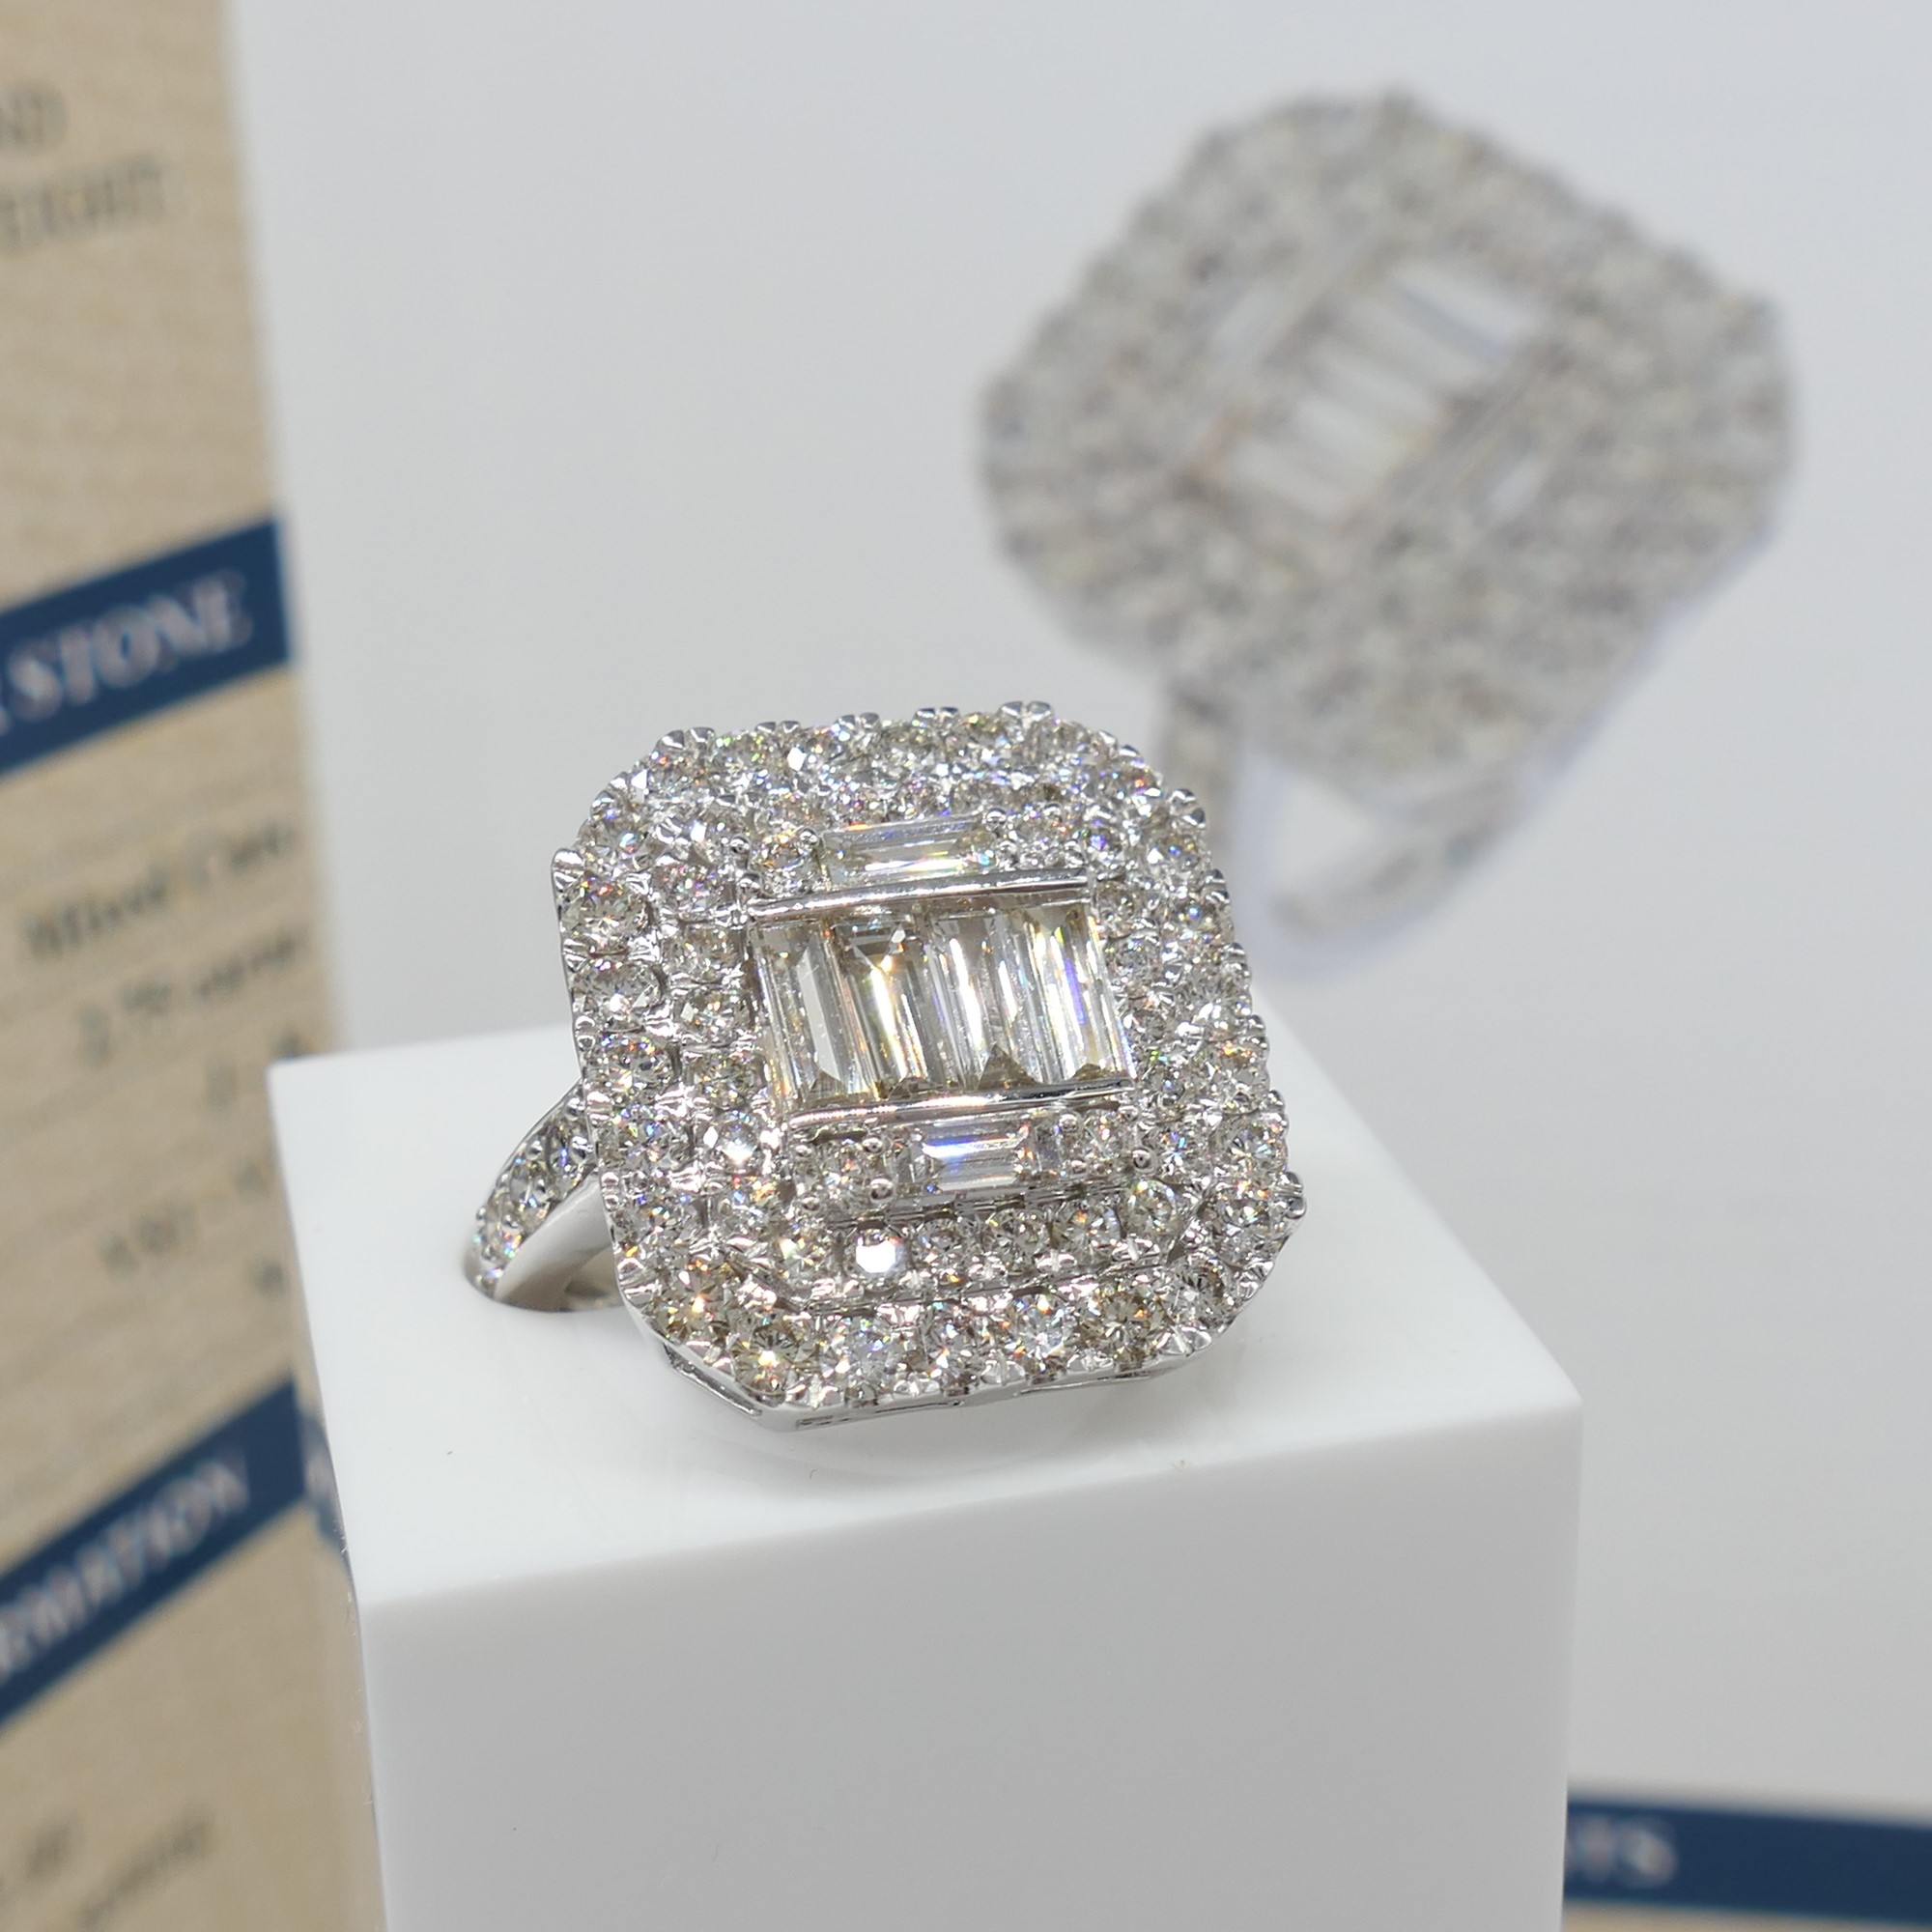 Large and Impressive White Gold 2.75 Carat Diamond Cocktail Ring - Image 7 of 8